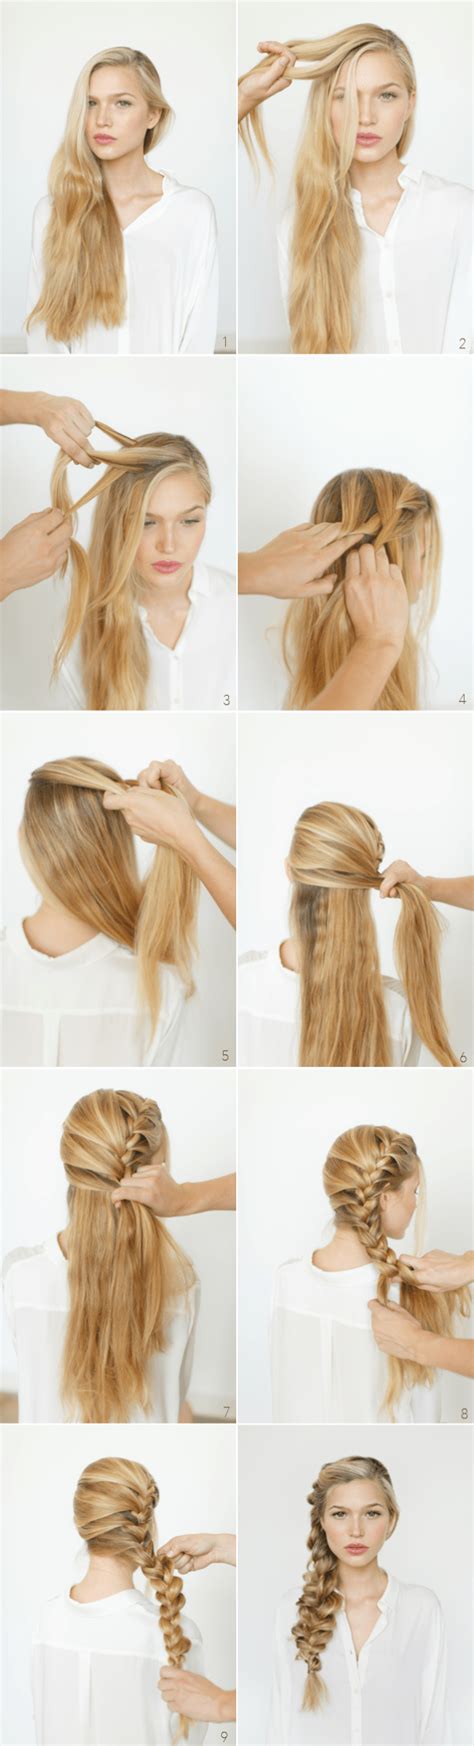 15 Very Amiable And Very Simple Diy Hairstyle Tutorials All For